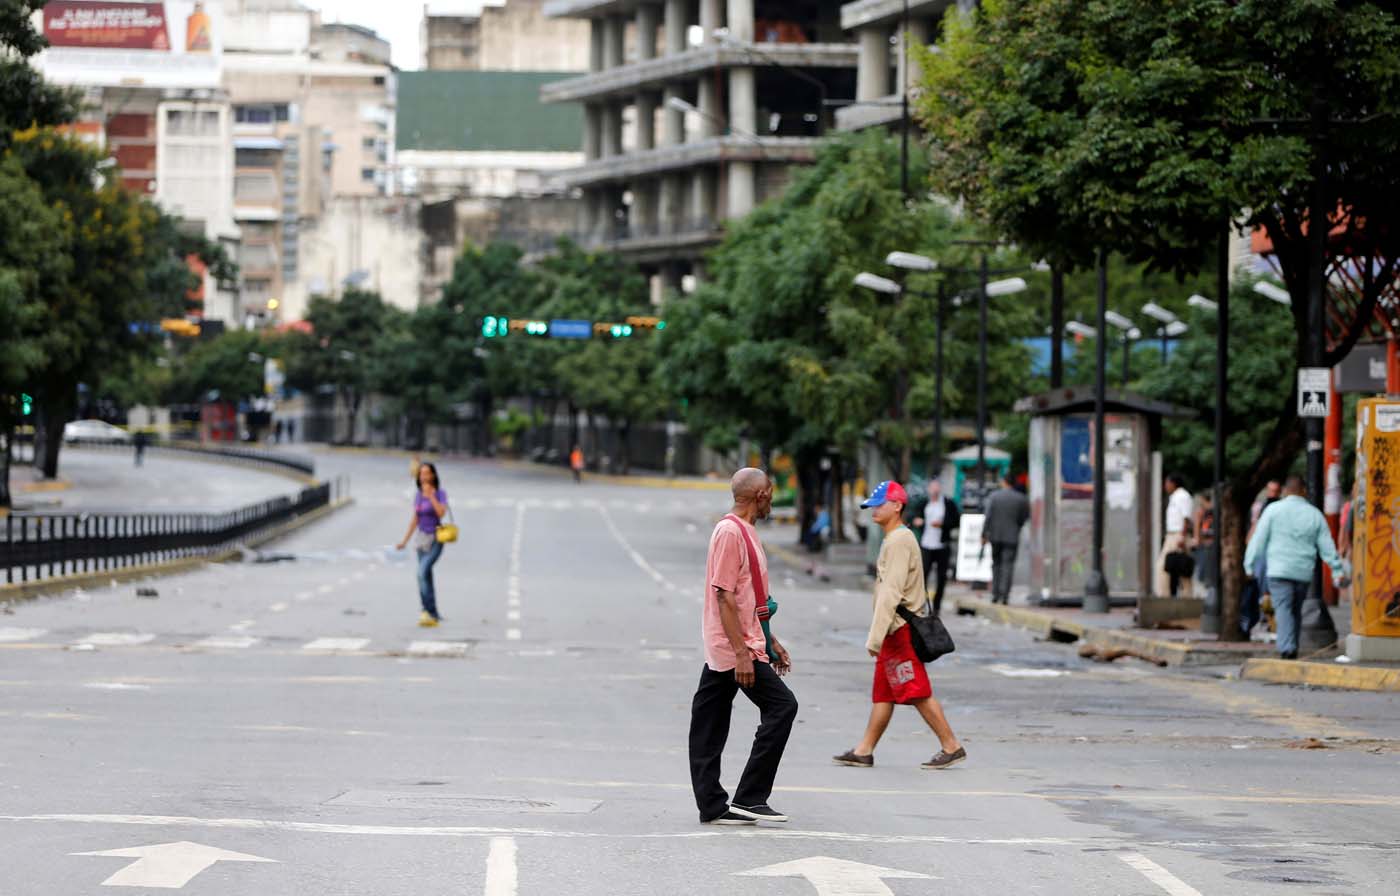 People walk along empty roads during a strike called to protest against Venezuelan President Nicolas Maduro's government in Caracas, Venezuela, July 20, 2017. REUTERS/Andres Martinez Casares